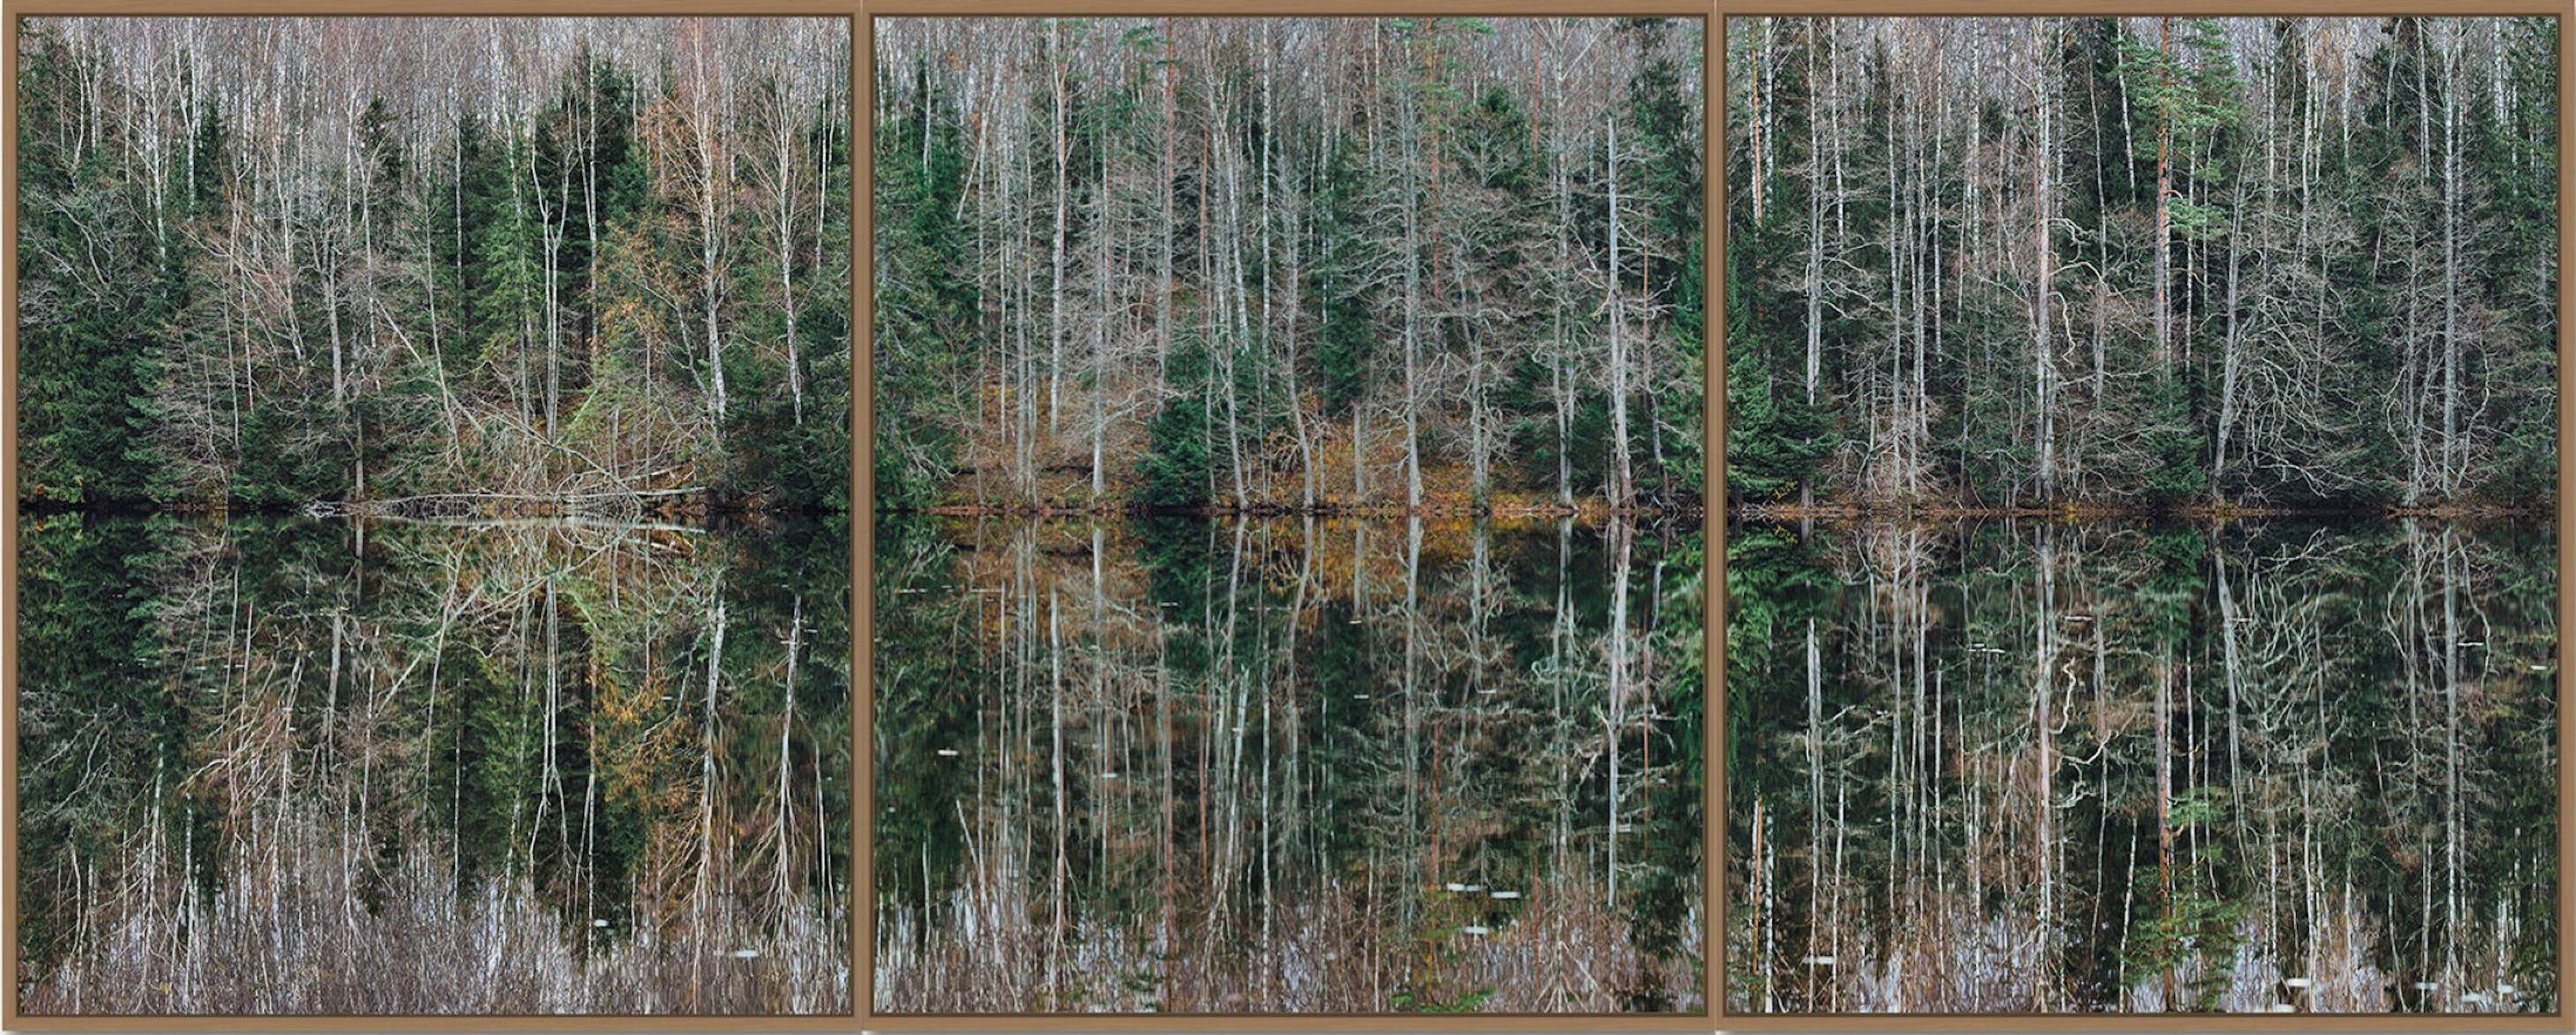 Deep Mirroring Forest 005 is a limited-edition photograph by German contemporary artist Bernhard Lang. 

This photograph is sold unframed as a print only. It is available in 6 dimensions:
*40 × 100 cm (15.7 × 39.4 in), edition of 5 copies
*60 × 150